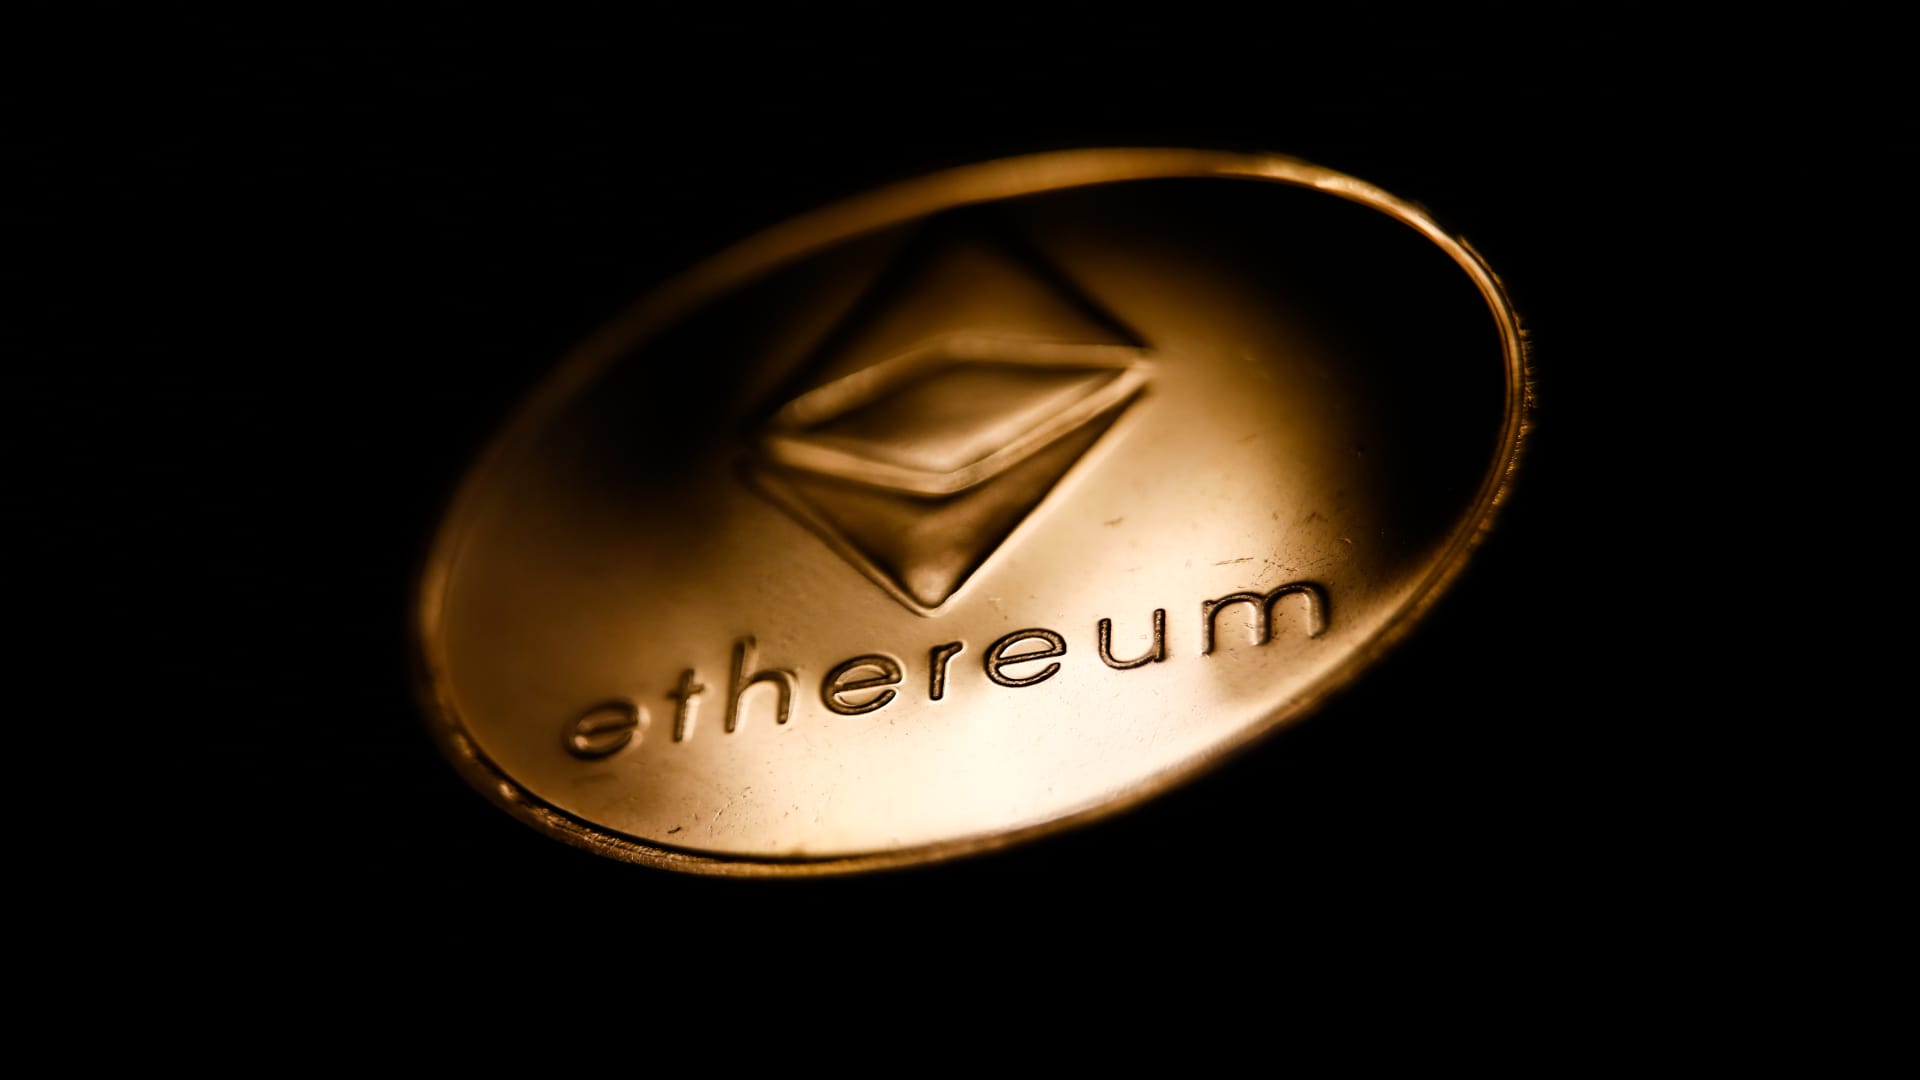 Ethereum just pulled off its final test run ahead of one of the most important events in crypto